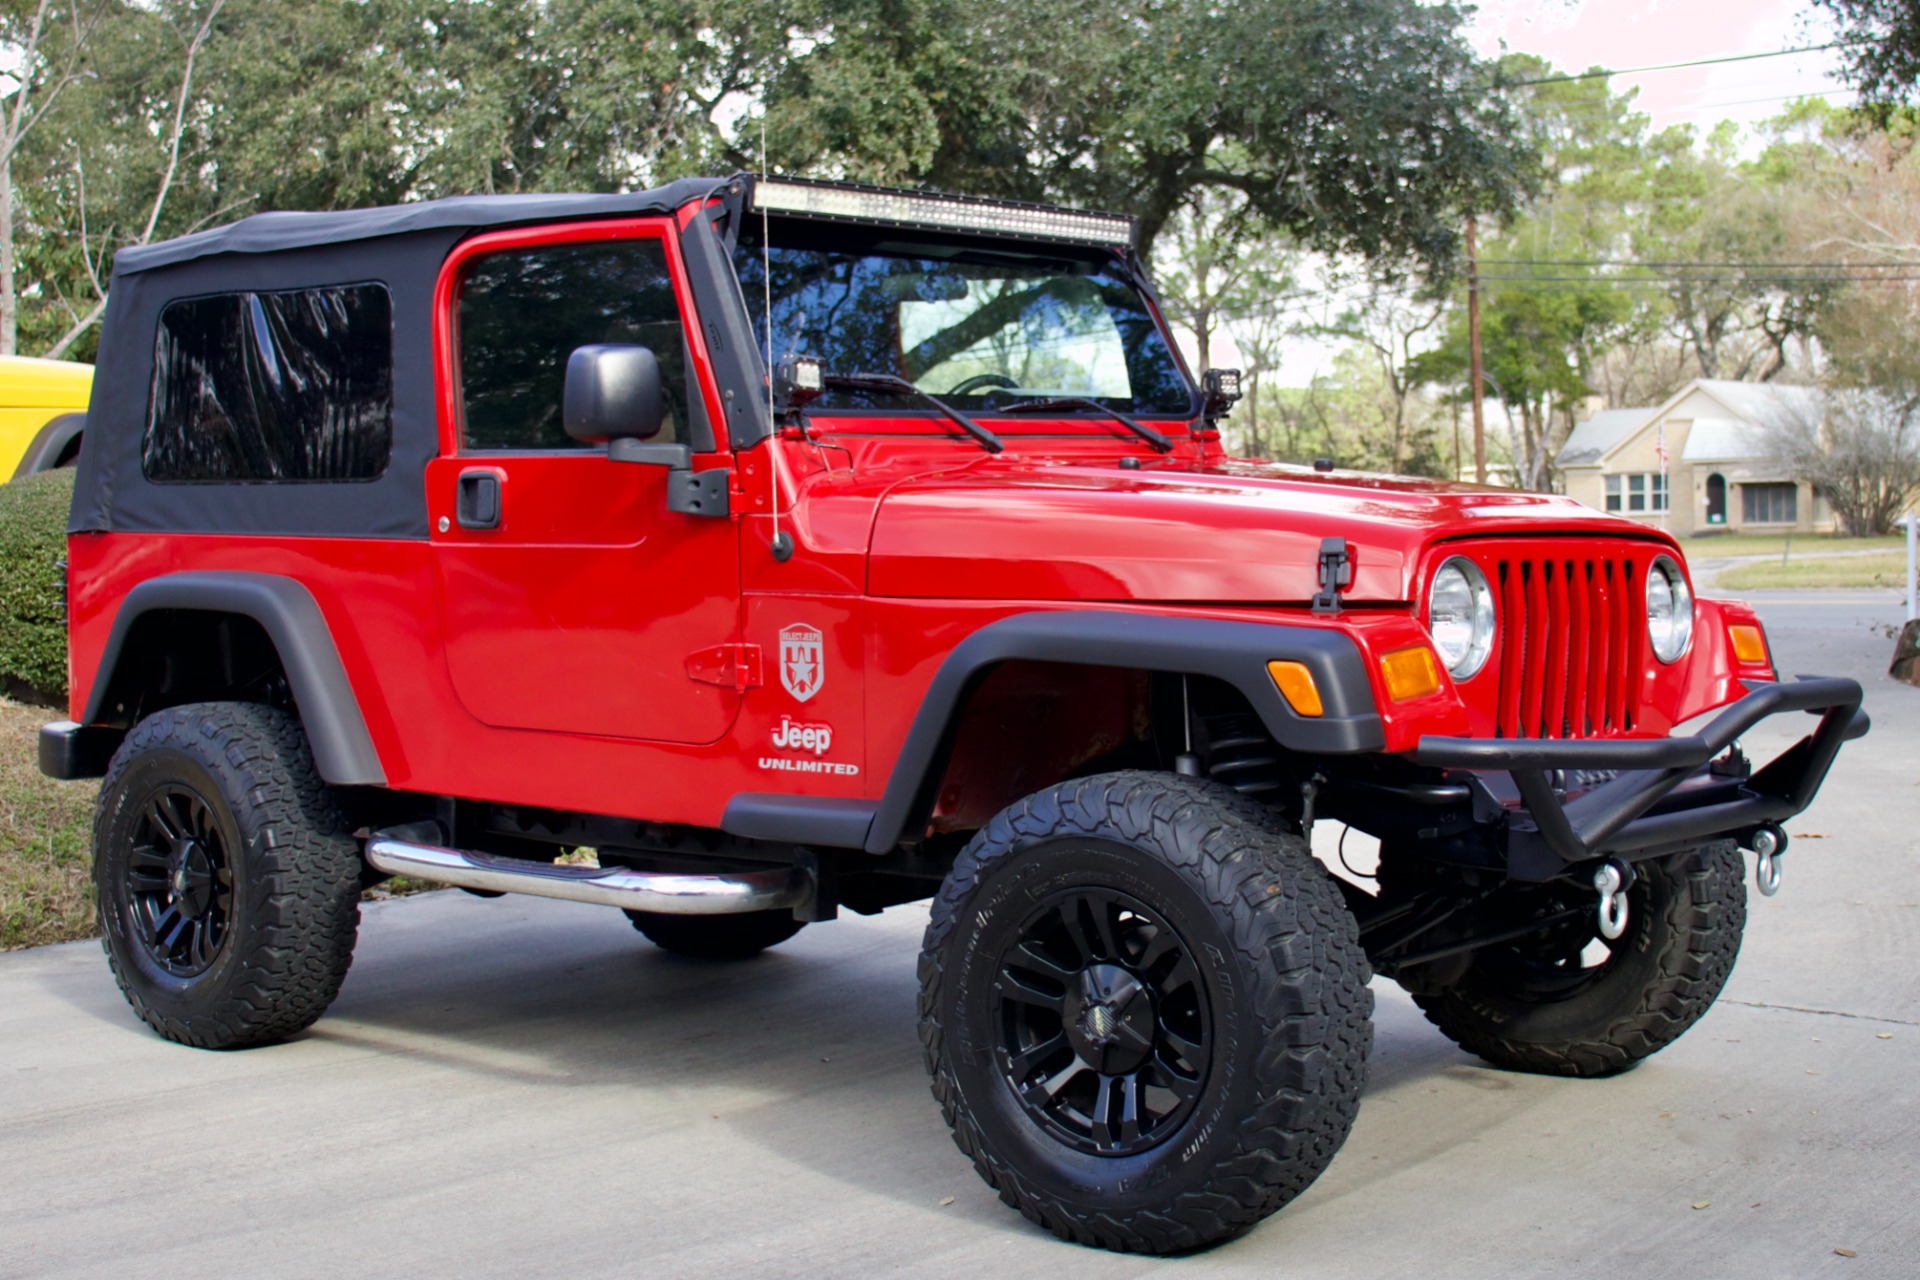 Used 2006 Jeep Wrangler Unlimited For Sale ($14,995) | Select Jeeps Inc.  Stock #735012